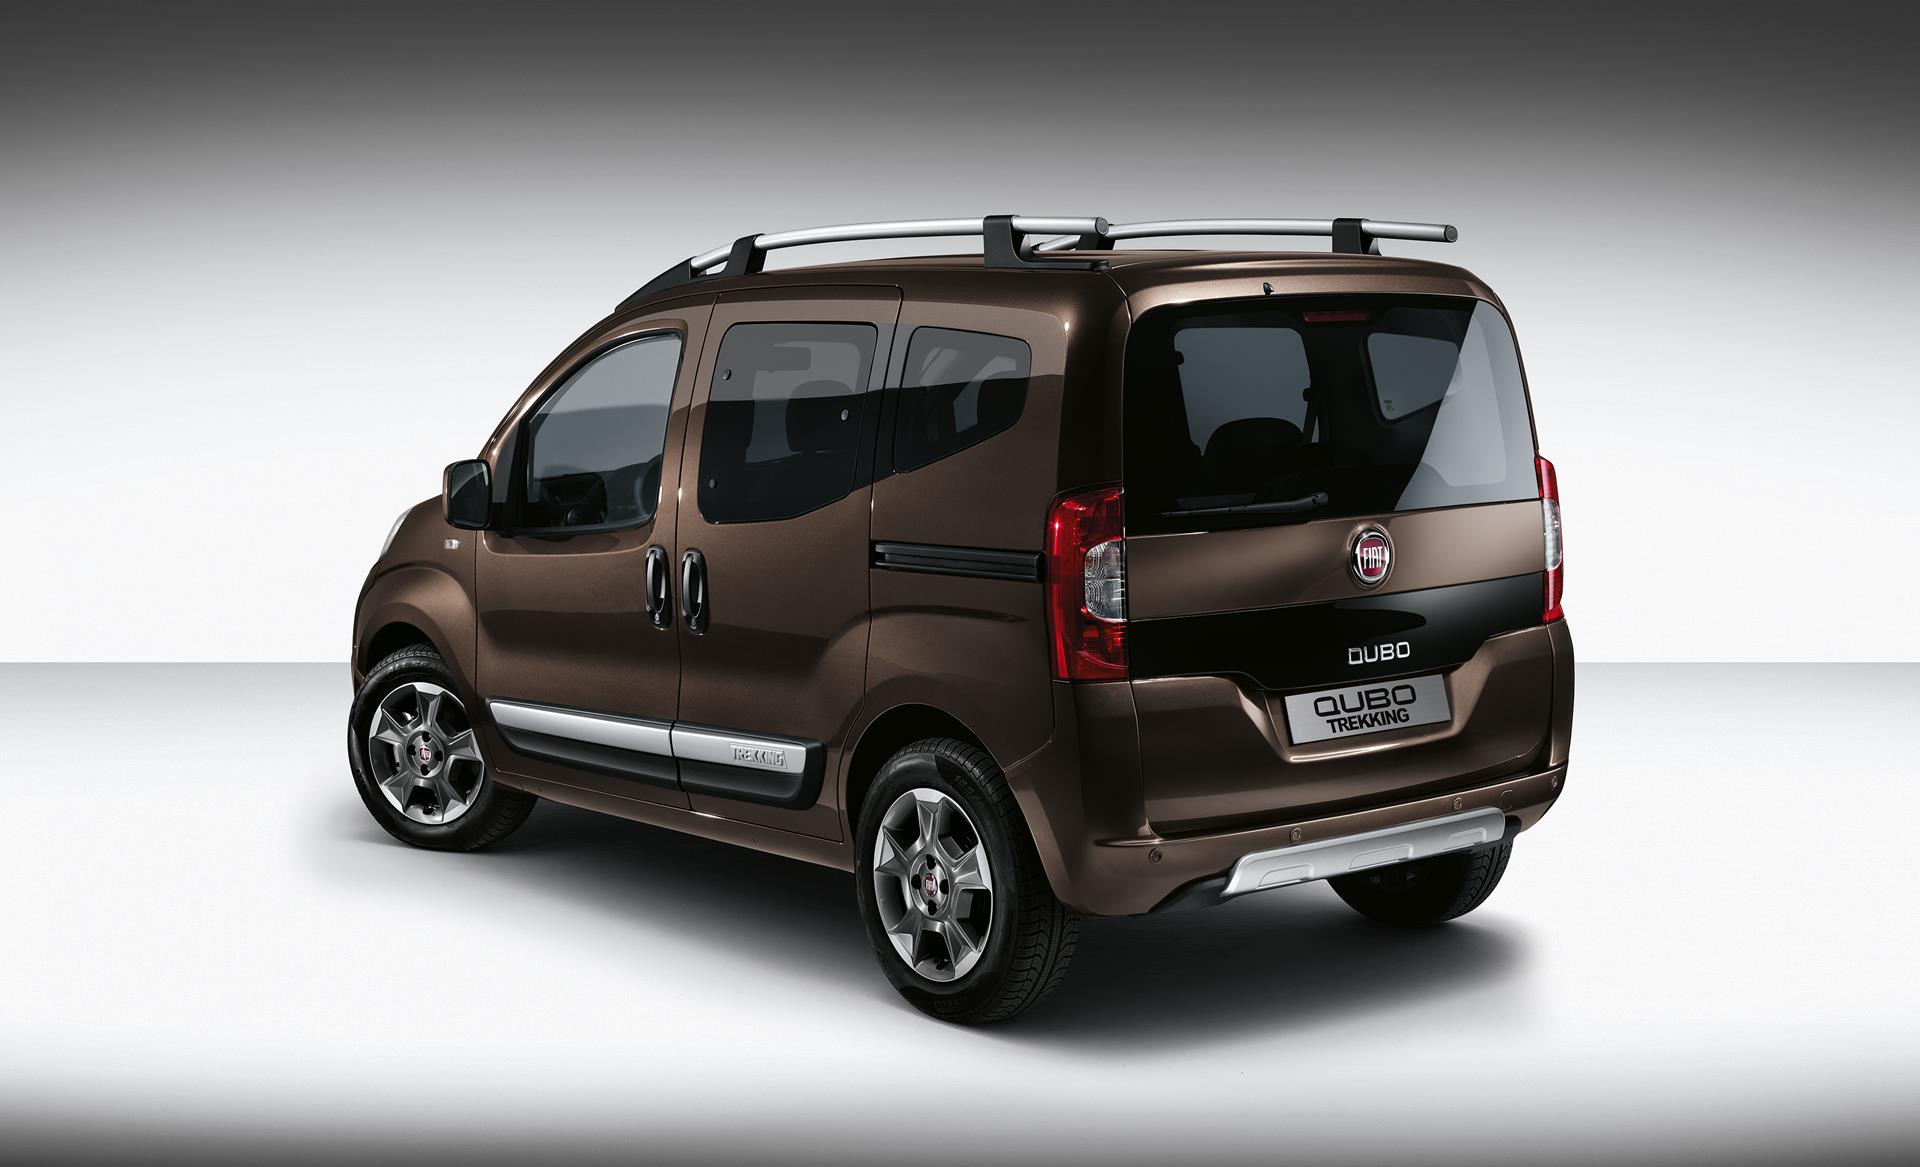 NEW FIAT QUBO NOW AVAILABLE TO ORDER IN THE UK